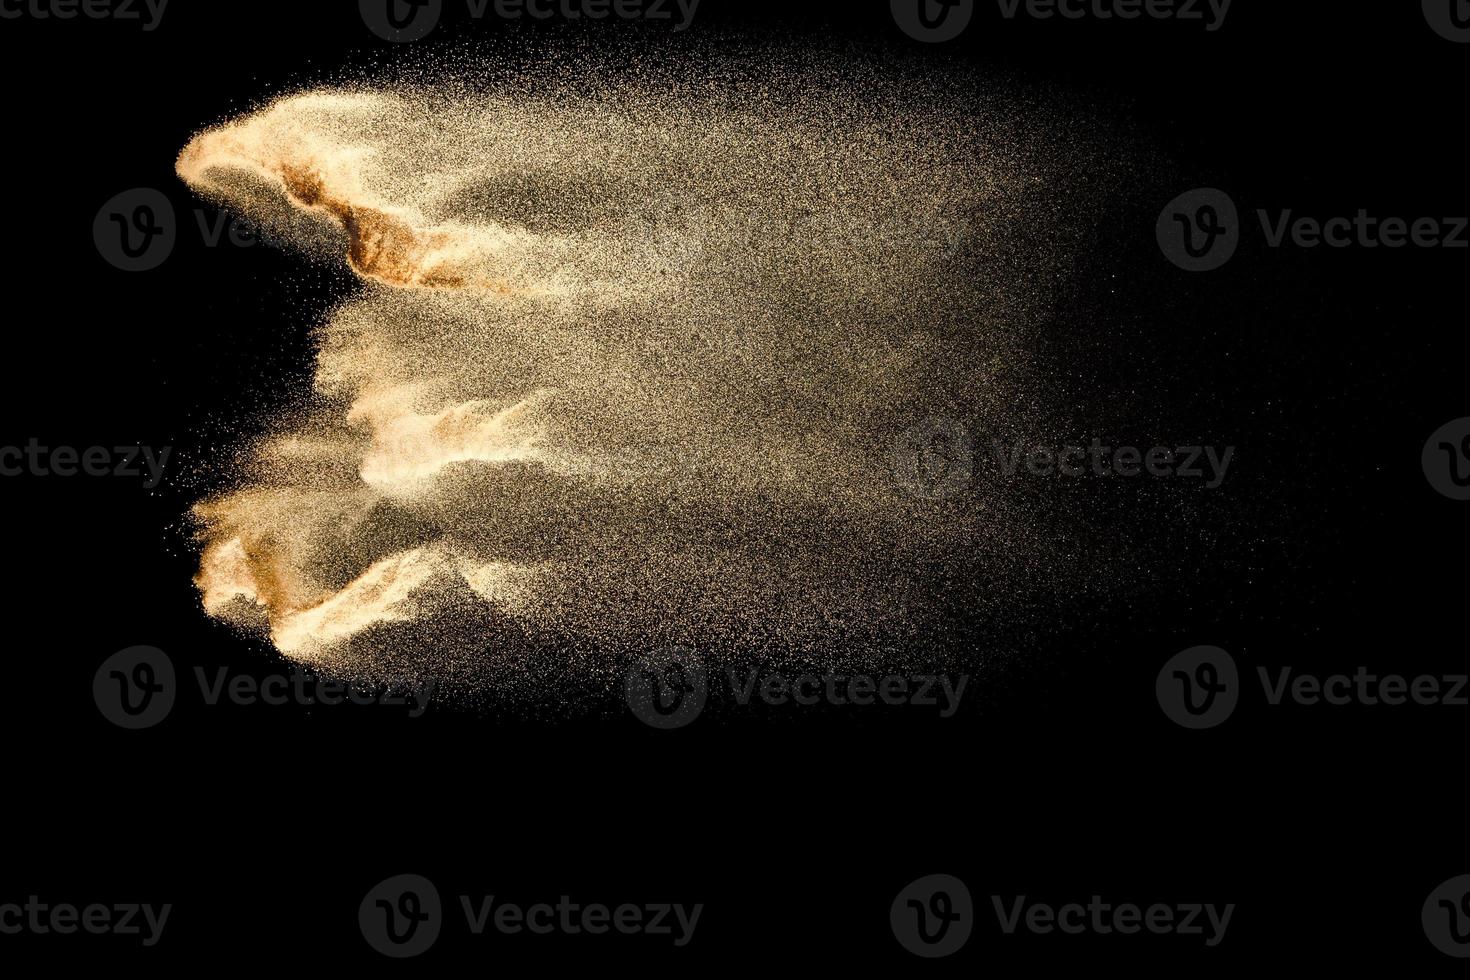 Abstract sand cloud.Golden colored sand splash agianst dark background.Yellow sand fly wave in the air. Sand explode on black background ,throwing freeze stop motion concept. photo